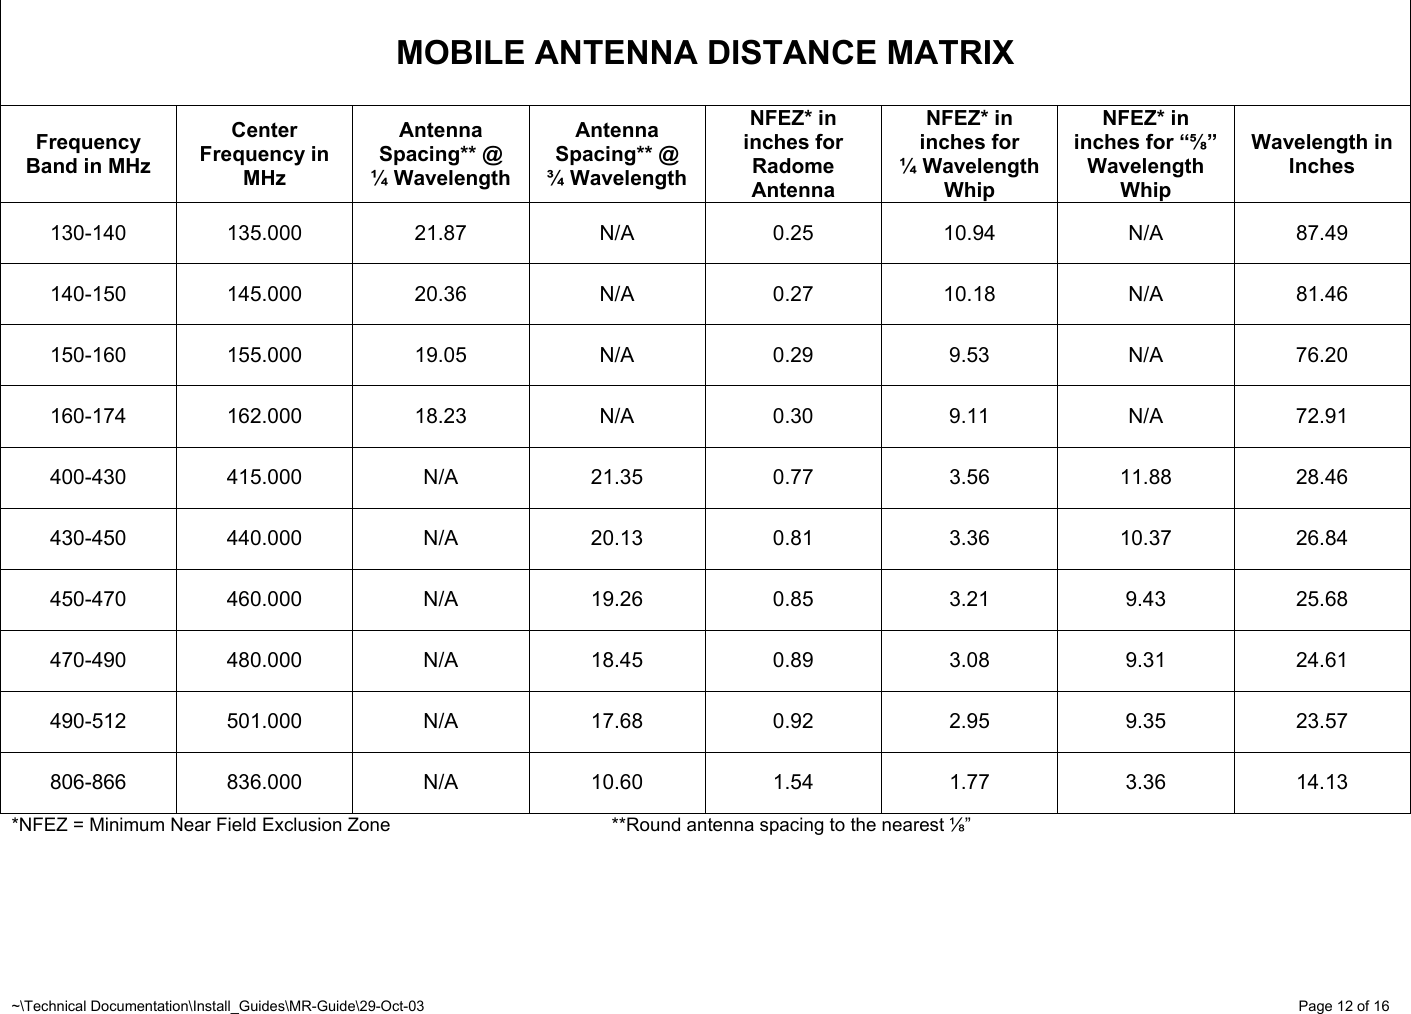 ~\Technical Documentation\Install_Guides\MR-Guide\29-Oct-03   Page 12 of 16    MOBILE ANTENNA DISTANCE MATRIX Frequency Band in MHz Center Frequency in MHz Antenna Spacing** @ ¼ Wavelength Antenna Spacing** @ ¾ Wavelength NFEZ* in inches for Radome Antenna NFEZ* in inches for  ¼ Wavelength Whip NFEZ* in inches for “⅝” Wavelength Whip Wavelength in Inches 130-140 135.000  21.87  N/A  0.25 10.94  N/A  87.49 140-150 145.000  20.36  N/A  0.27 10.18  N/A  81.46 150-160 155.000  19.05  N/A  0.29  9.53  N/A  76.20 160-174 162.000  18.23  N/A  0.30  9.11  N/A  72.91 400-430 415.000  N/A  21.35  0.77 3.56 11.88 28.46 430-450 440.000  N/A  20.13  0.81 3.36 10.37 26.84 450-470 460.000  N/A  19.26  0.85 3.21 9.43 25.68 470-490 480.000  N/A  18.45  0.89 3.08 9.31 24.61 490-512 501.000  N/A  17.68  0.92 2.95 9.35 23.57 806-866 836.000  N/A  10.60  1.54 1.77 3.36 14.13 *NFEZ = Minimum Near Field Exclusion Zone       **Round antenna spacing to the nearest ⅛” 